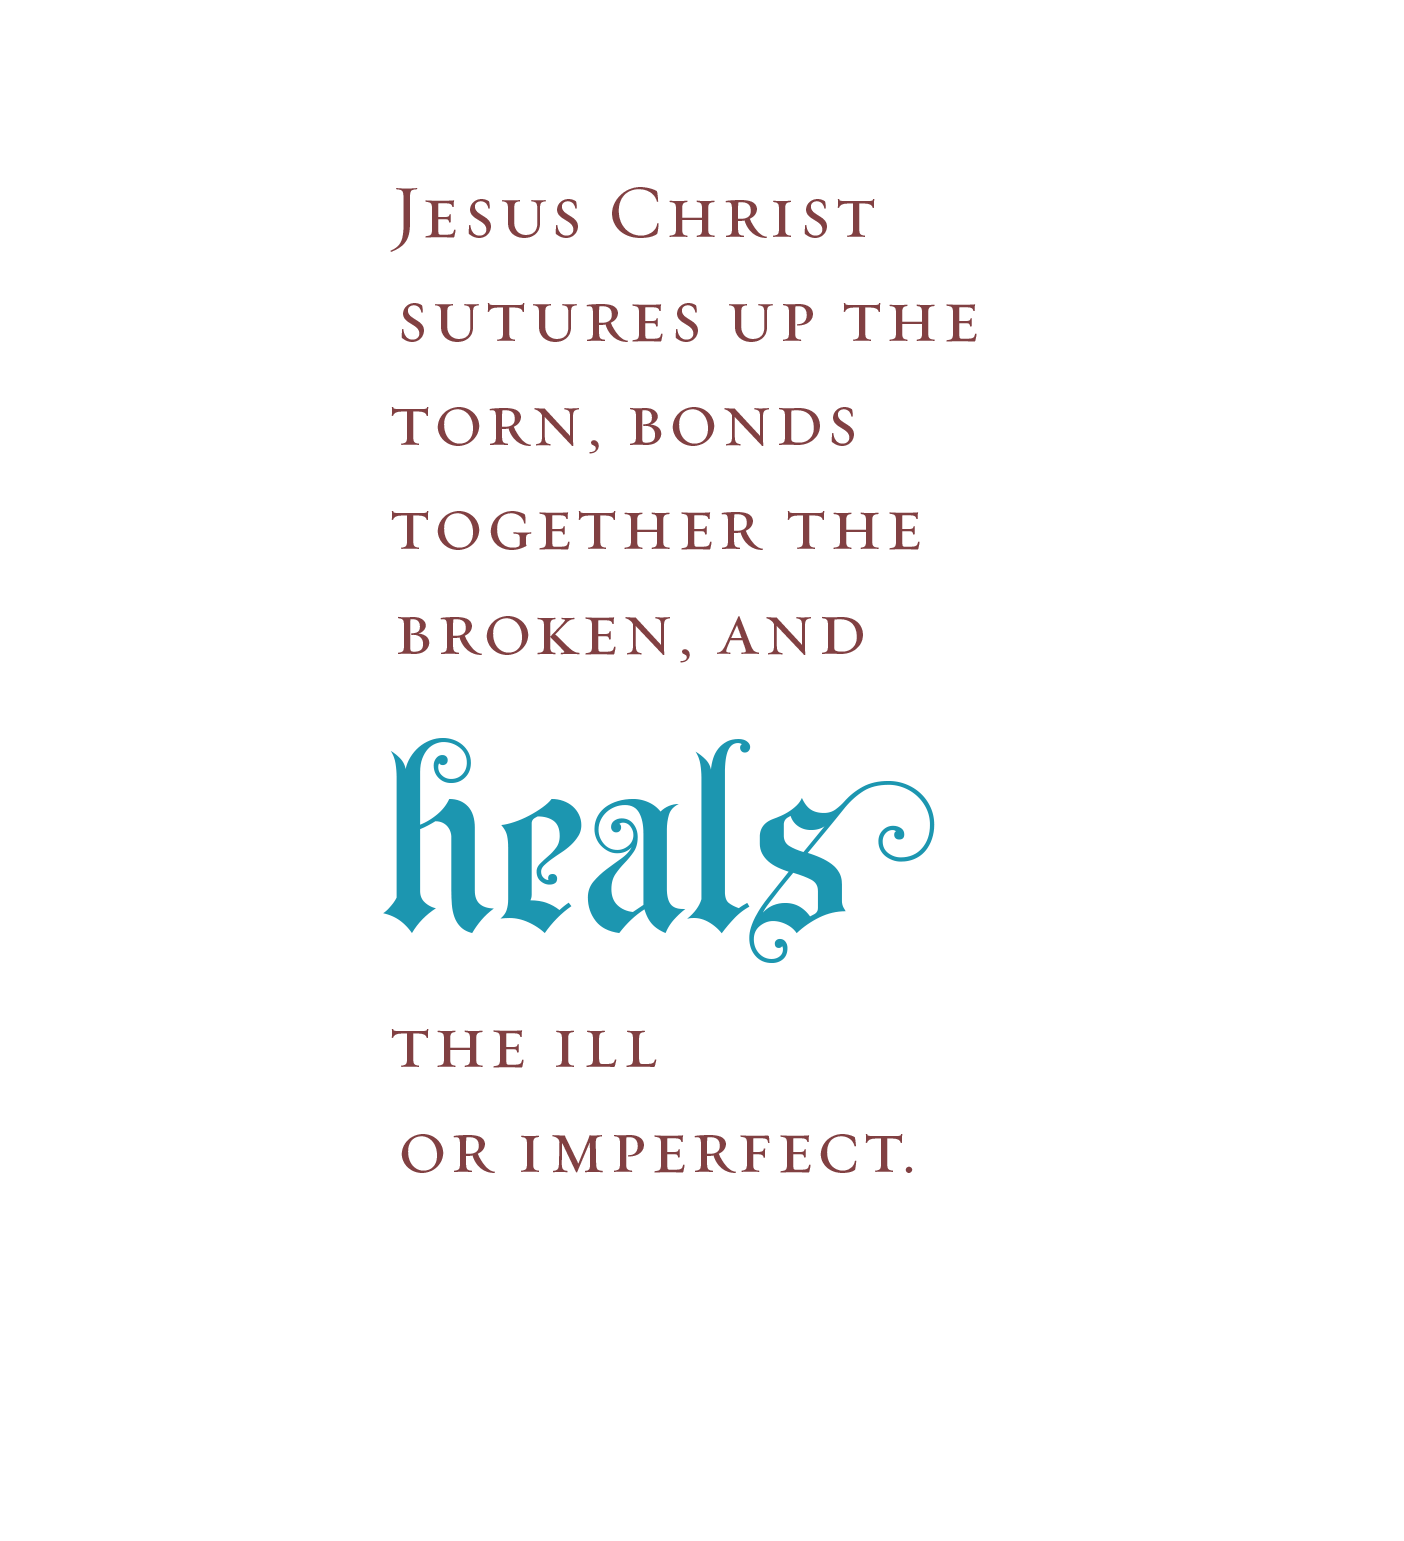 Pull quote: "Jesus Christ sutures up the torn, bonds together the broken, and heals the ill or imperfect."